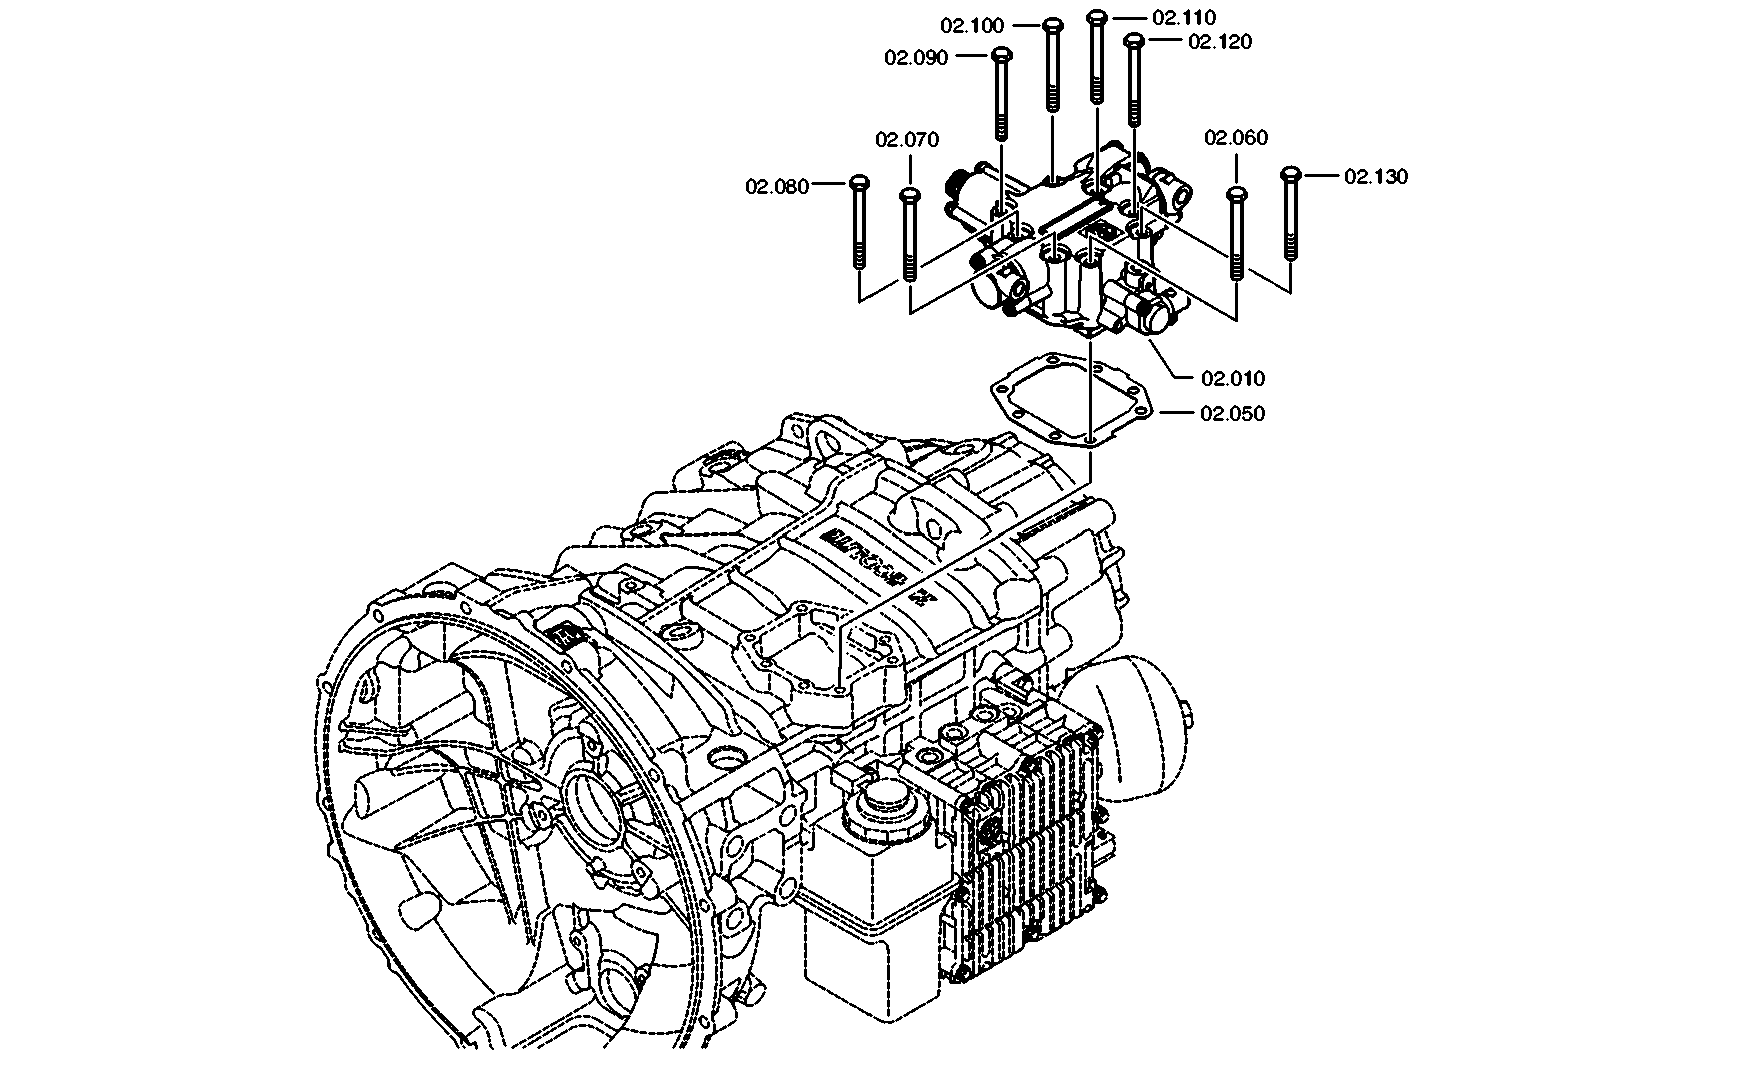 drawing for DAF 1821349 - TRANSMISSION ACTUATOR (figure 5)